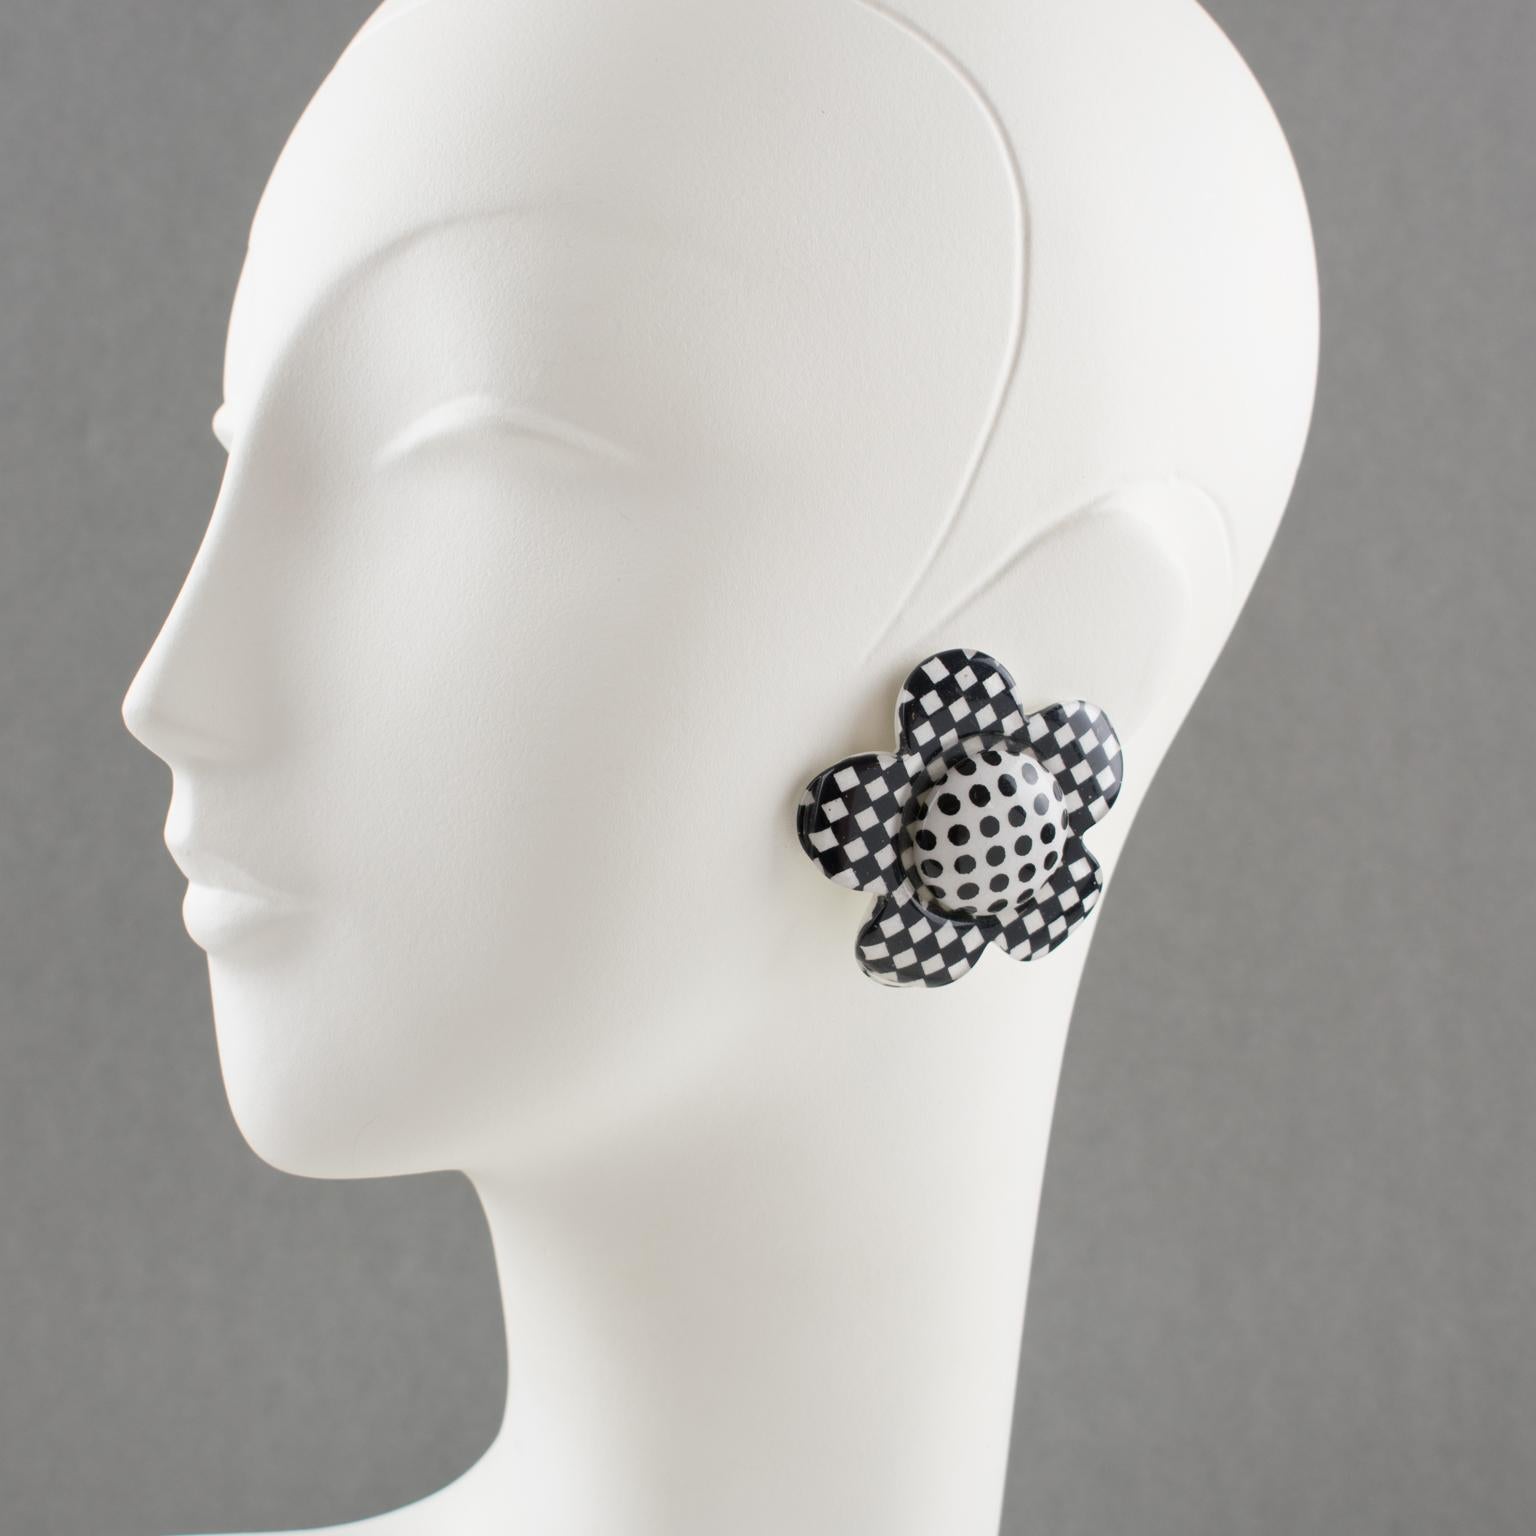 These charming clip-on earrings are a vintage treasure from the 1960s. They showcase a stunning Lucite design featuring a sizeable and intricate daisy-shaped pattern. The black and white checkerboard and polka dots add a touch of whimsy and